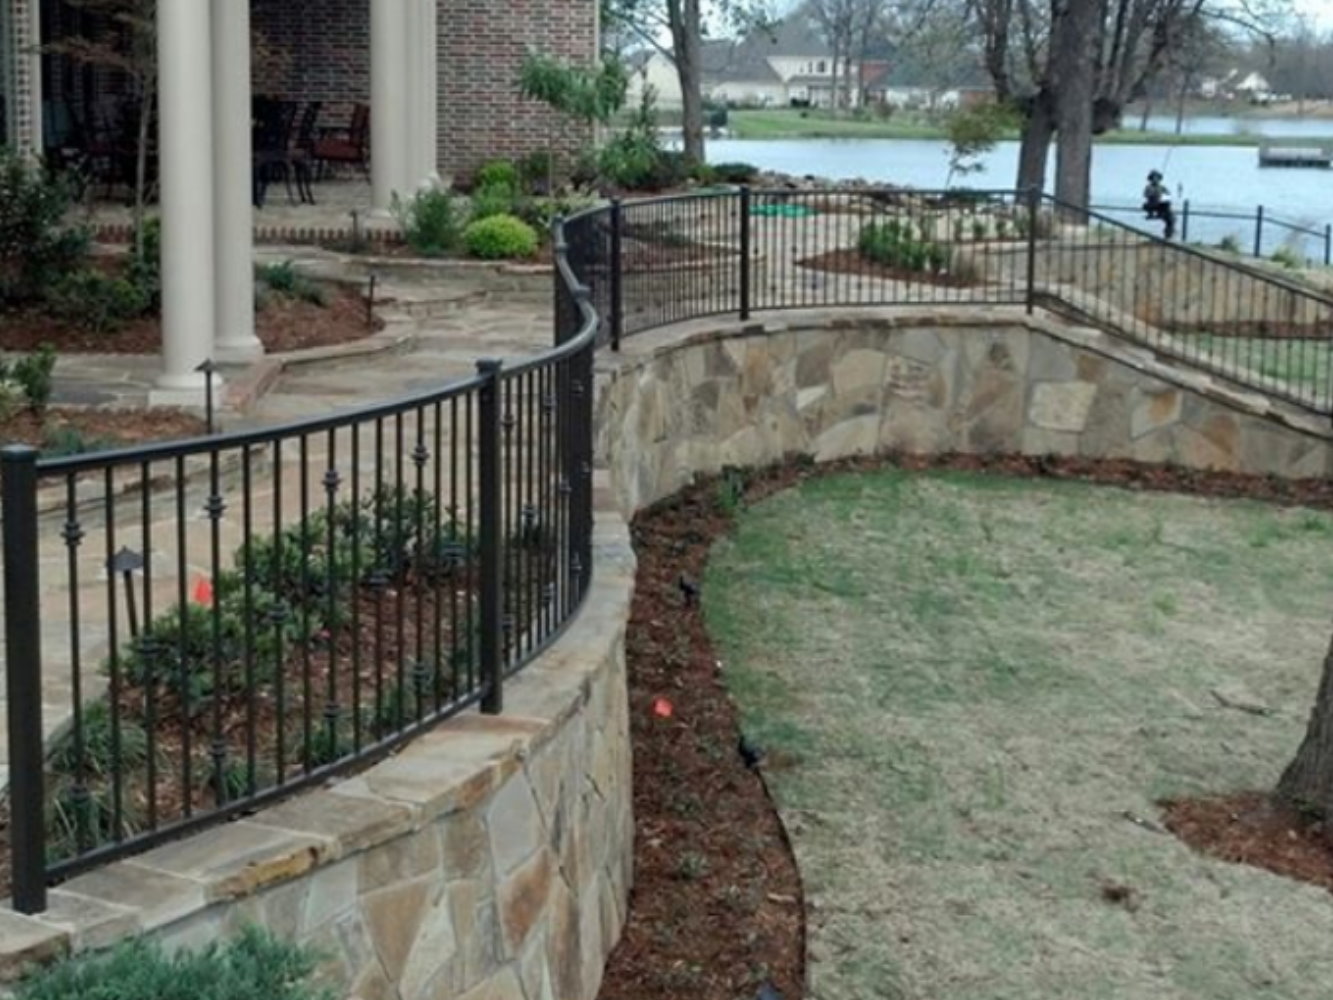 Foreman Arkansas residential fencing company